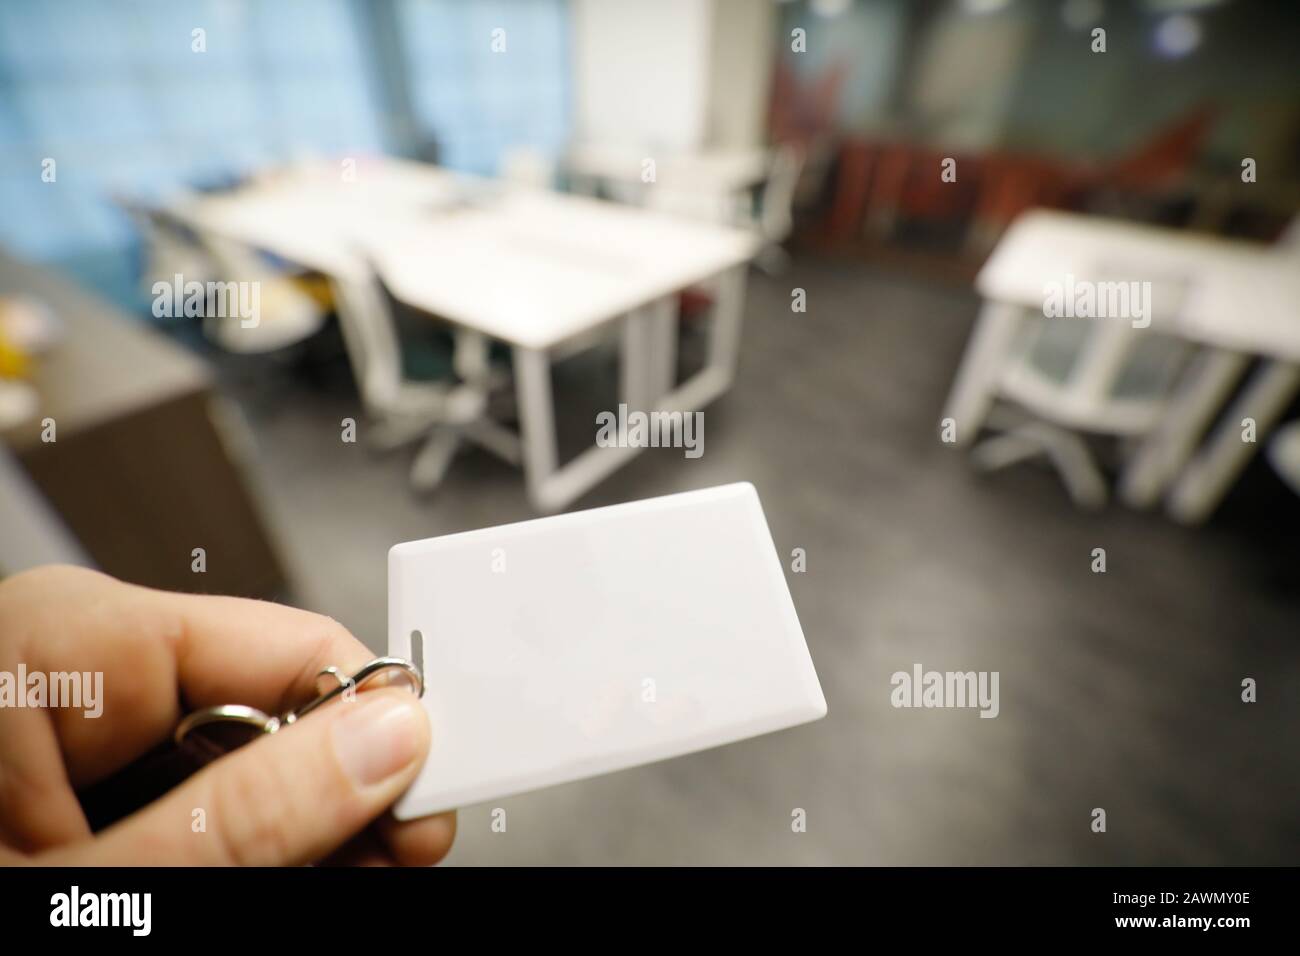 Shallow depth of field (selective focus) image with the hand of a man holding an access card inside an office building. Stock Photo